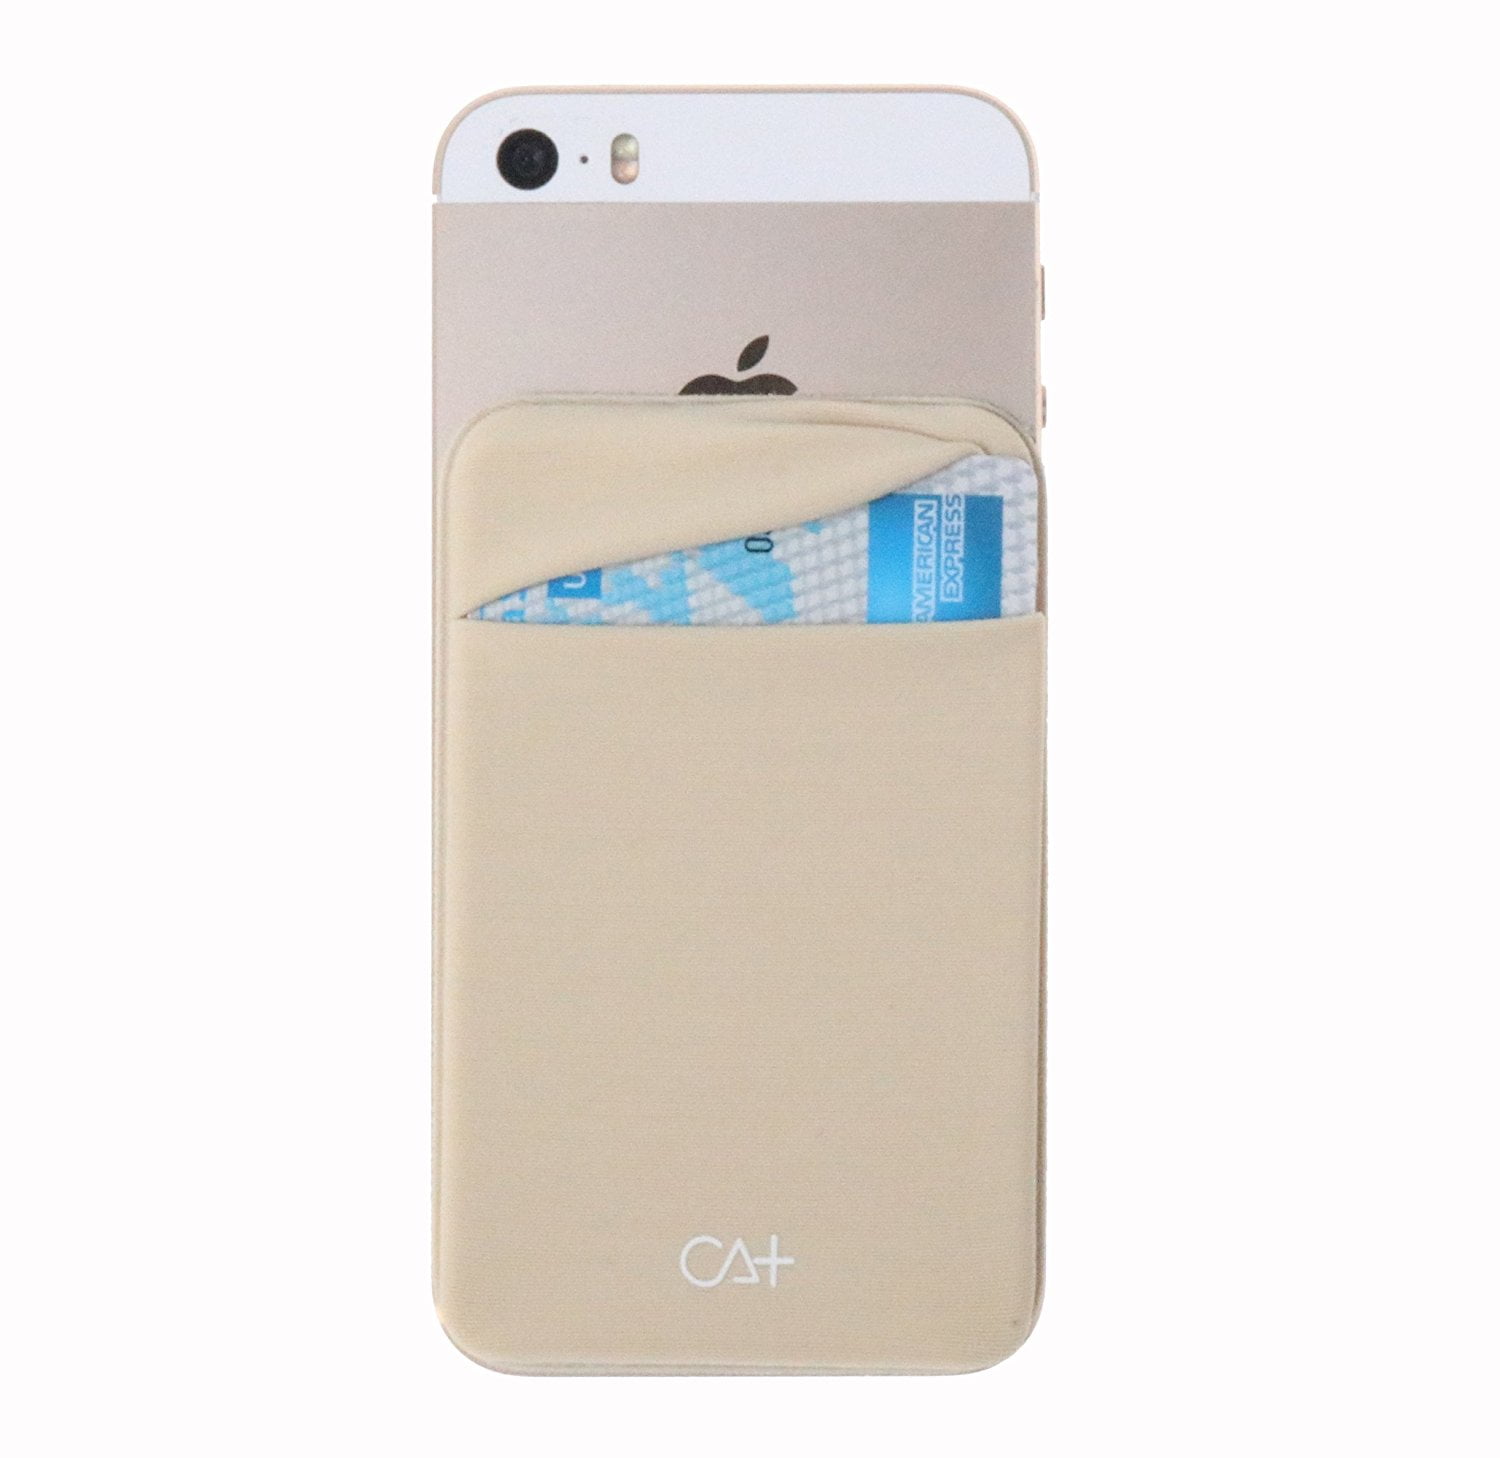 OBVIS Cell Phone Pocket Self Adhesive Card Holder Stick On Wallet